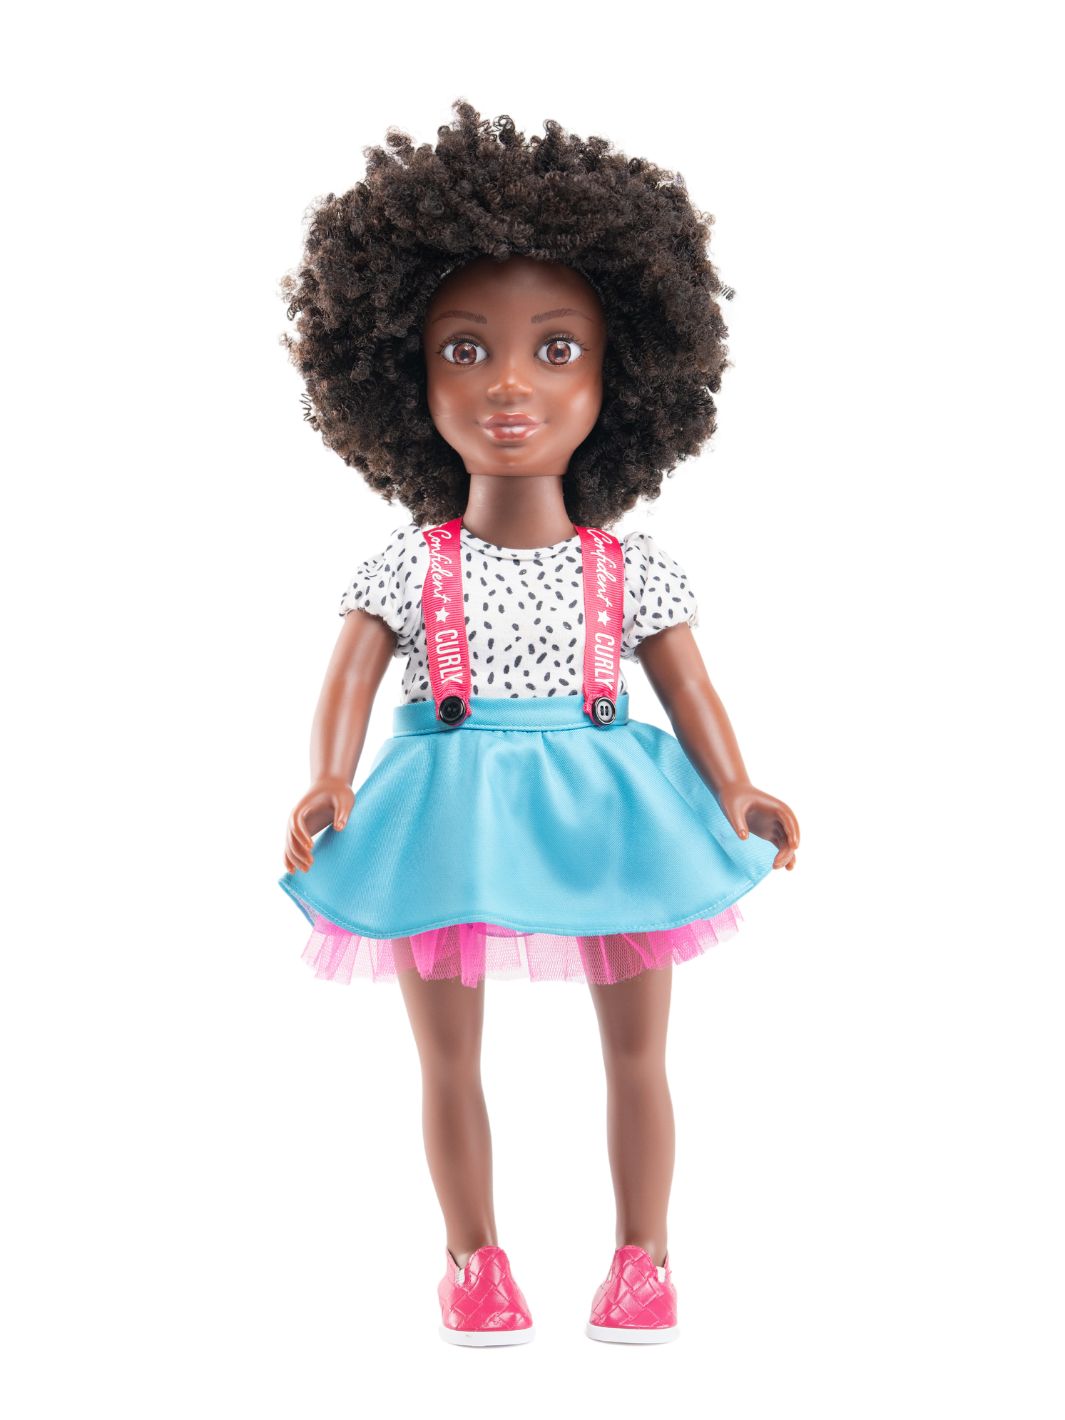 Beautiful Curly Me Bella Doll is an 18 inch doll with natural curly hair that can be washed and styled.